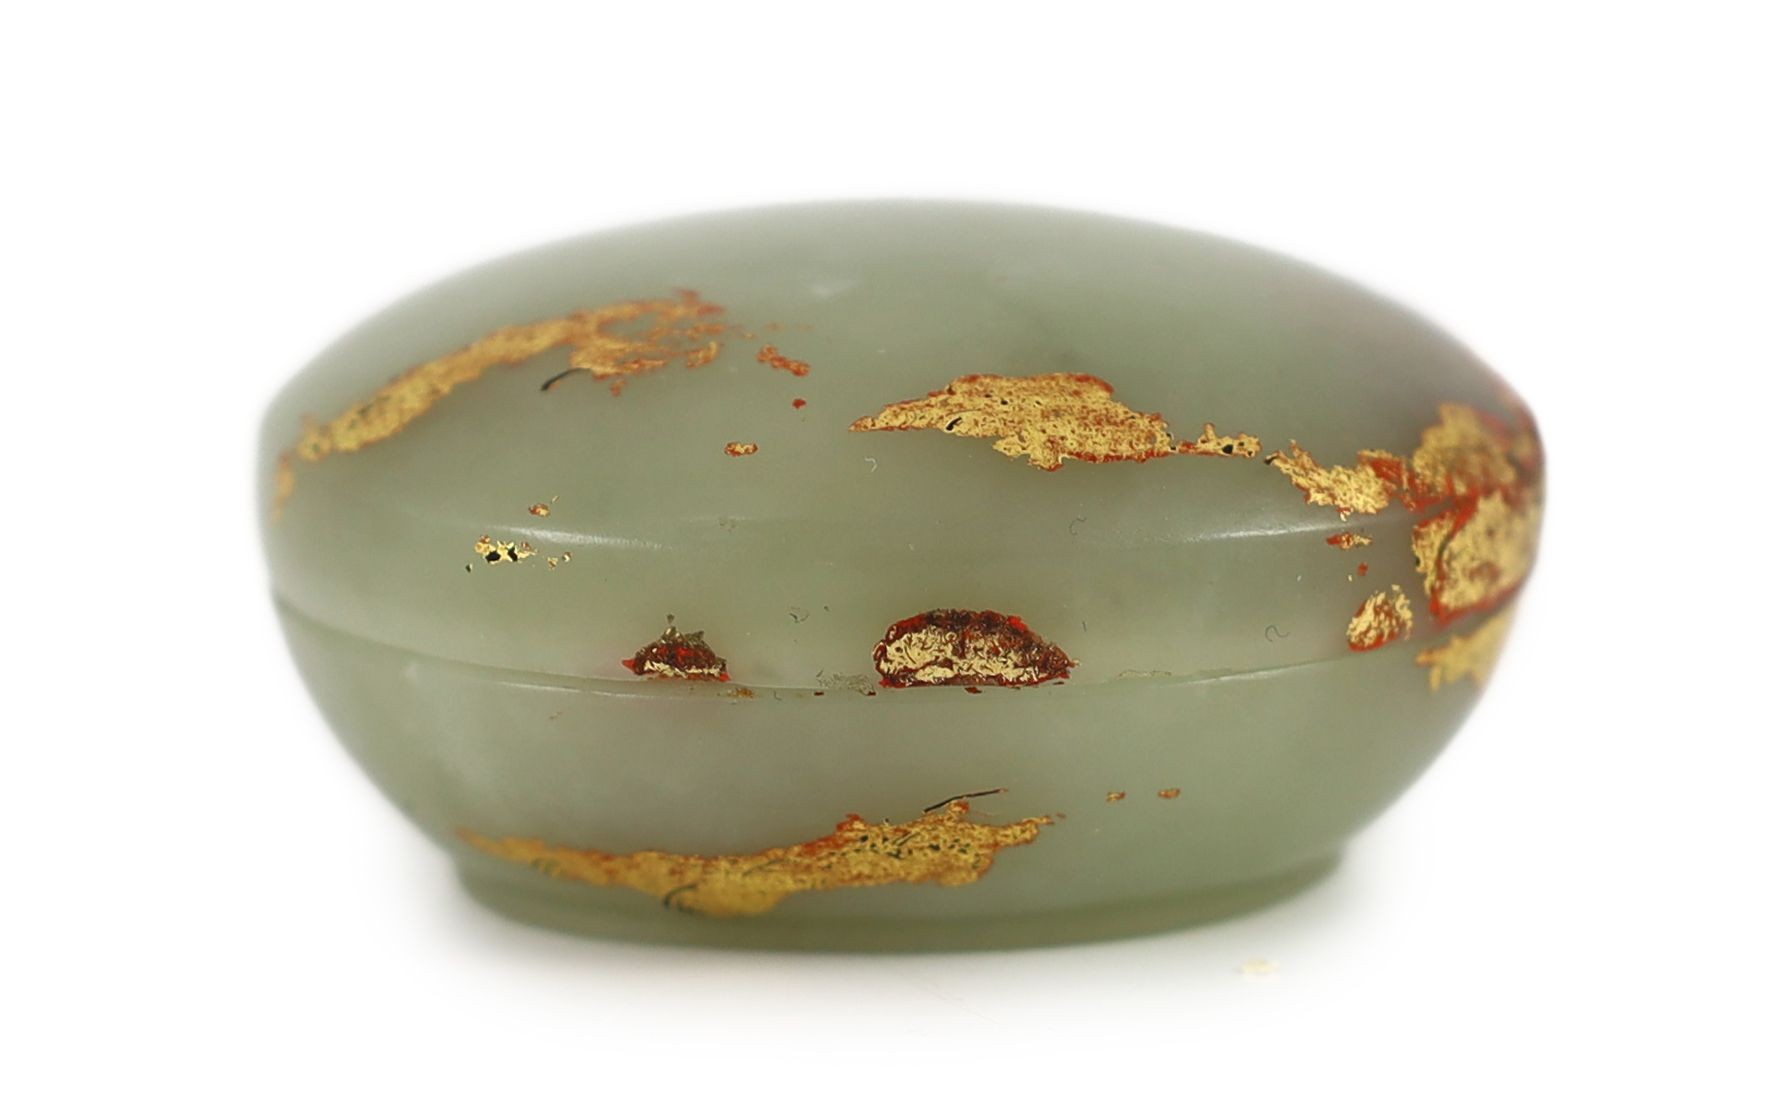 A Chinese pale celadon jade box and cover, 18th century, remnants of gilt lacquer decoration, 6cm wide